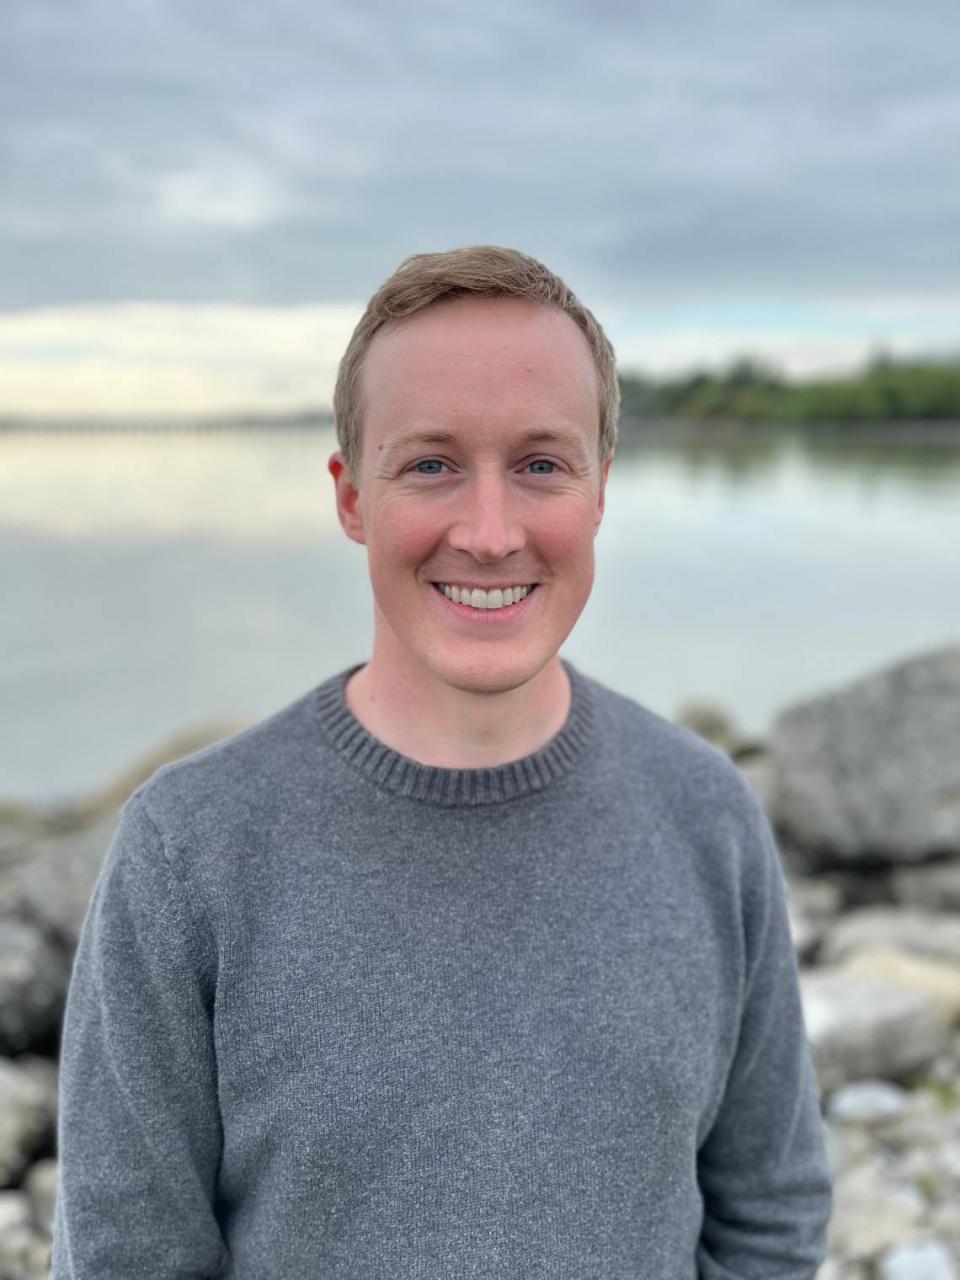 Eamonn Collins is one of three candidates running for the Bellingham City Council Ward 1 seat in the Aug. 1 primary election. Eamonn Collins/Courtesy to The Bellingham Herald